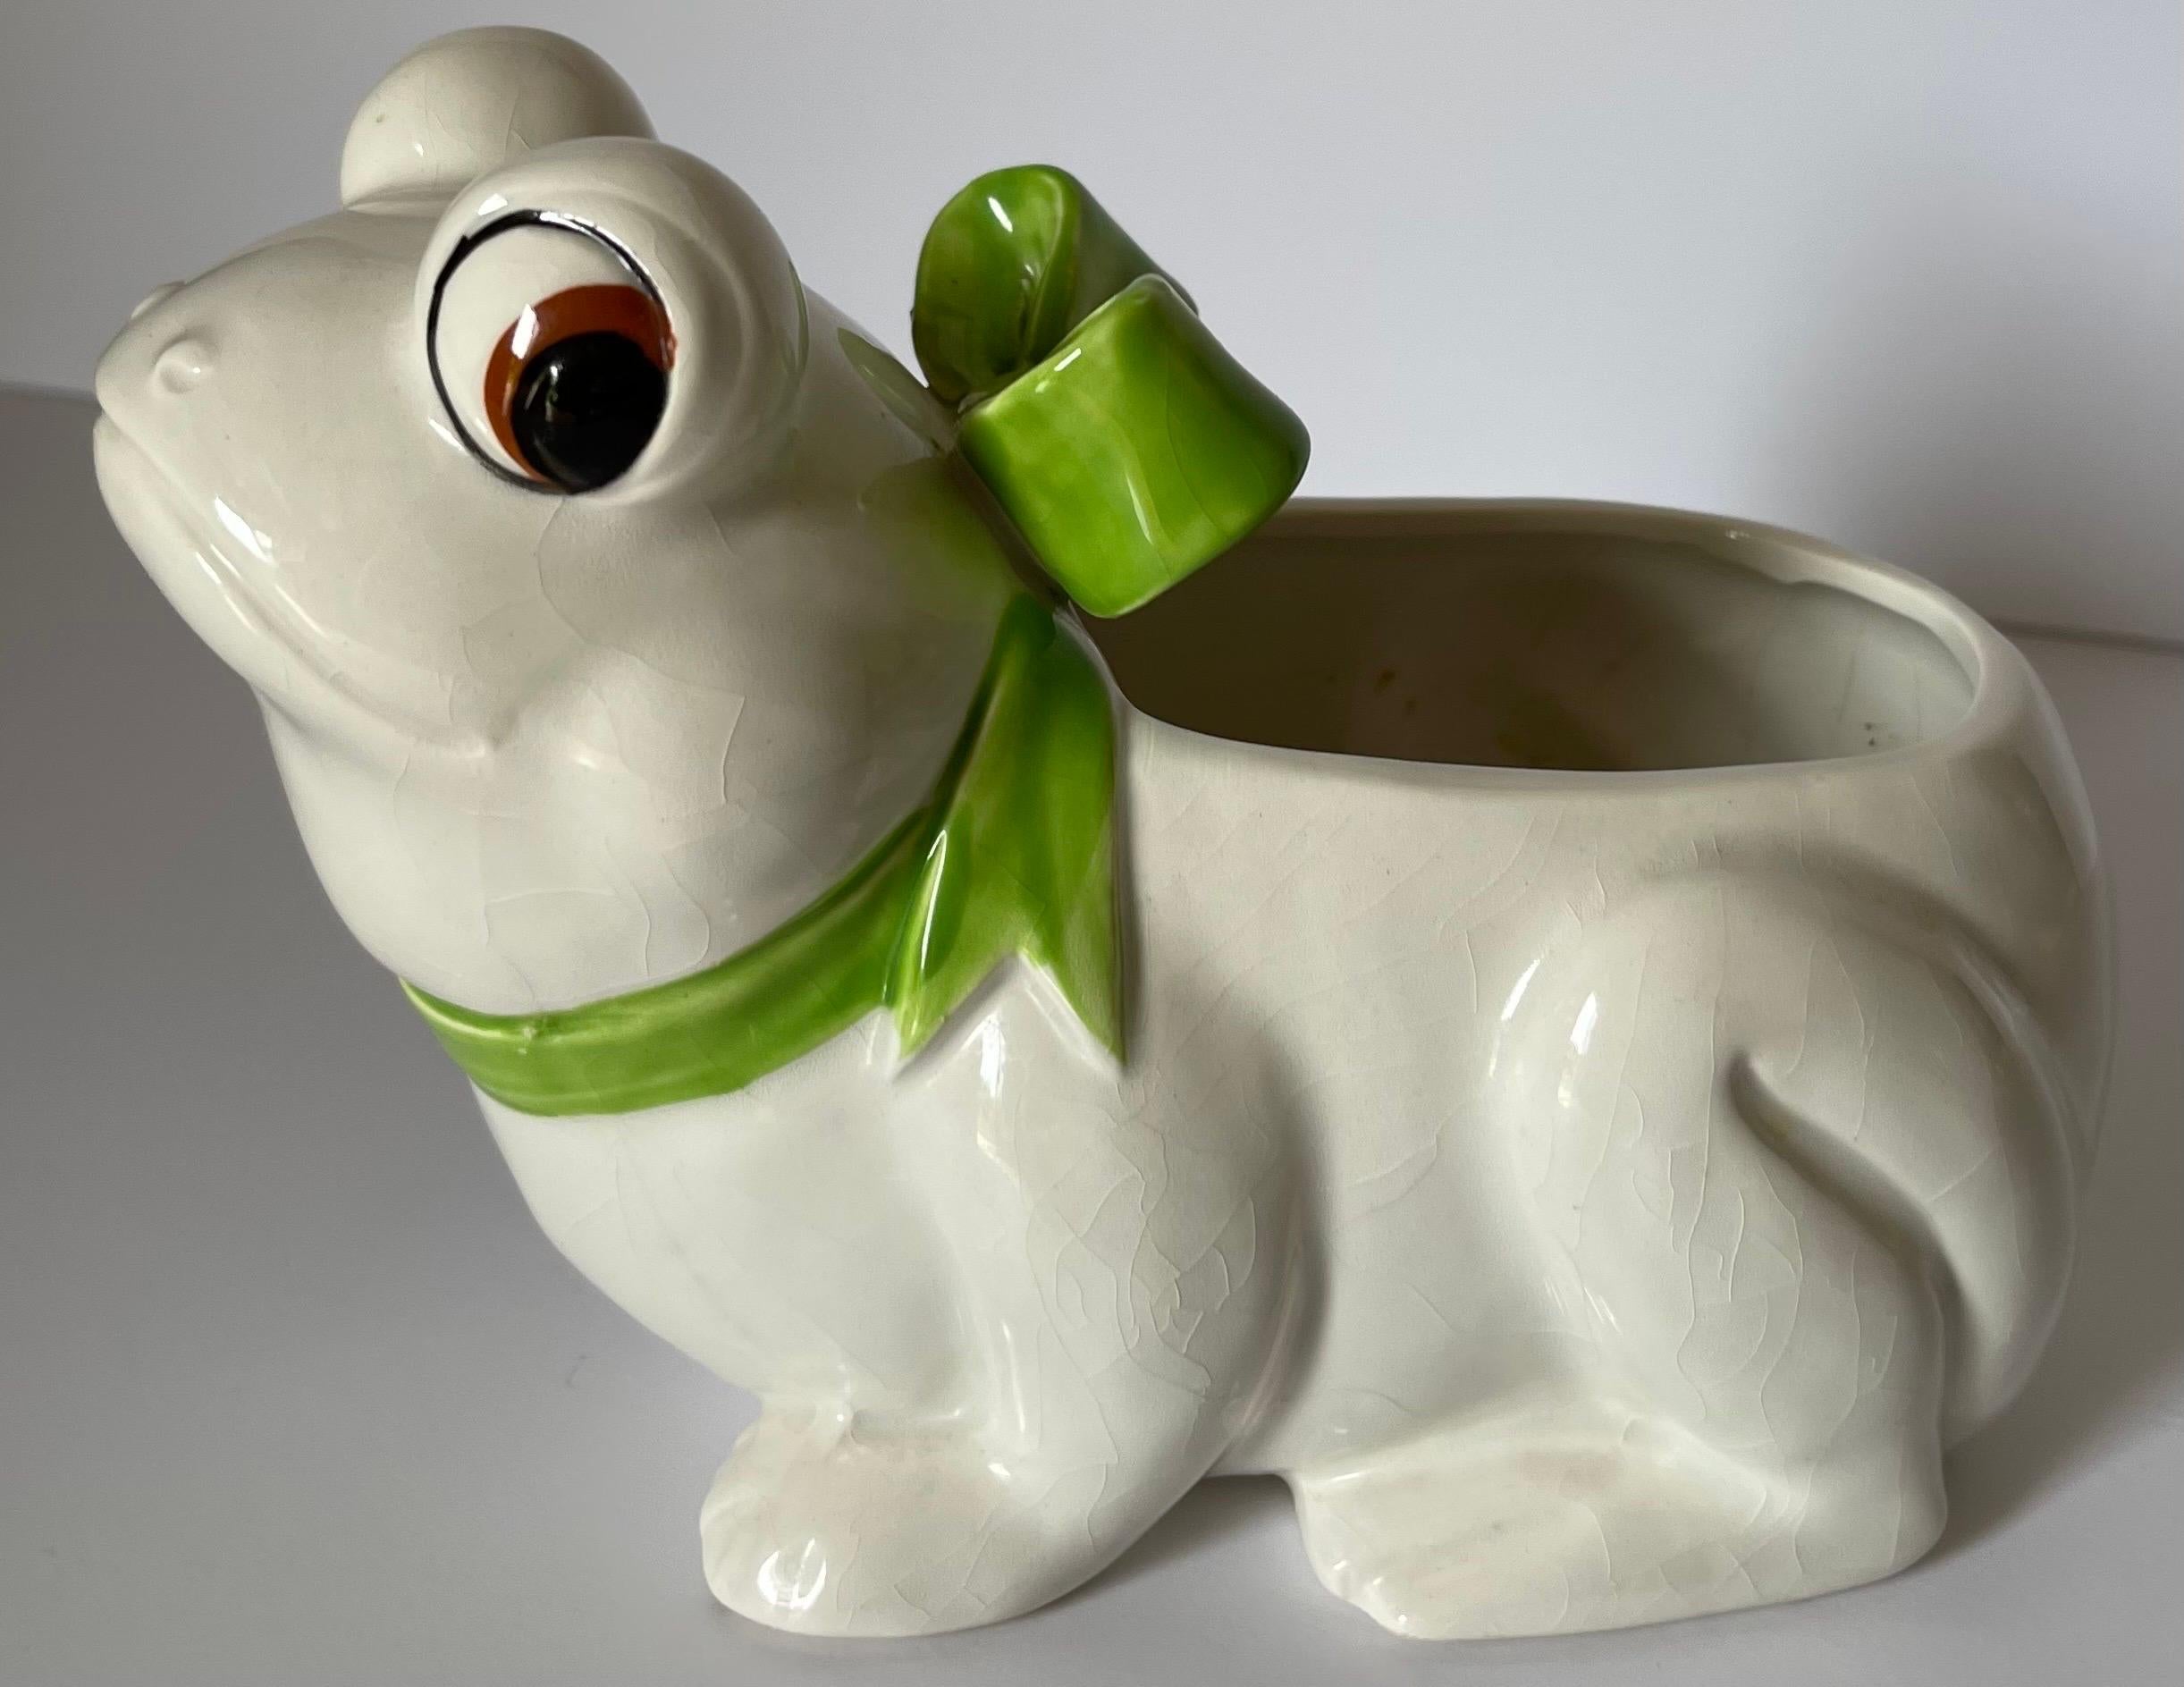 Whimsical 1970s ceramic frog ceramic planter. Cream colored glazed frog with Kelly green ceramic bow. No makers mark or signature. 